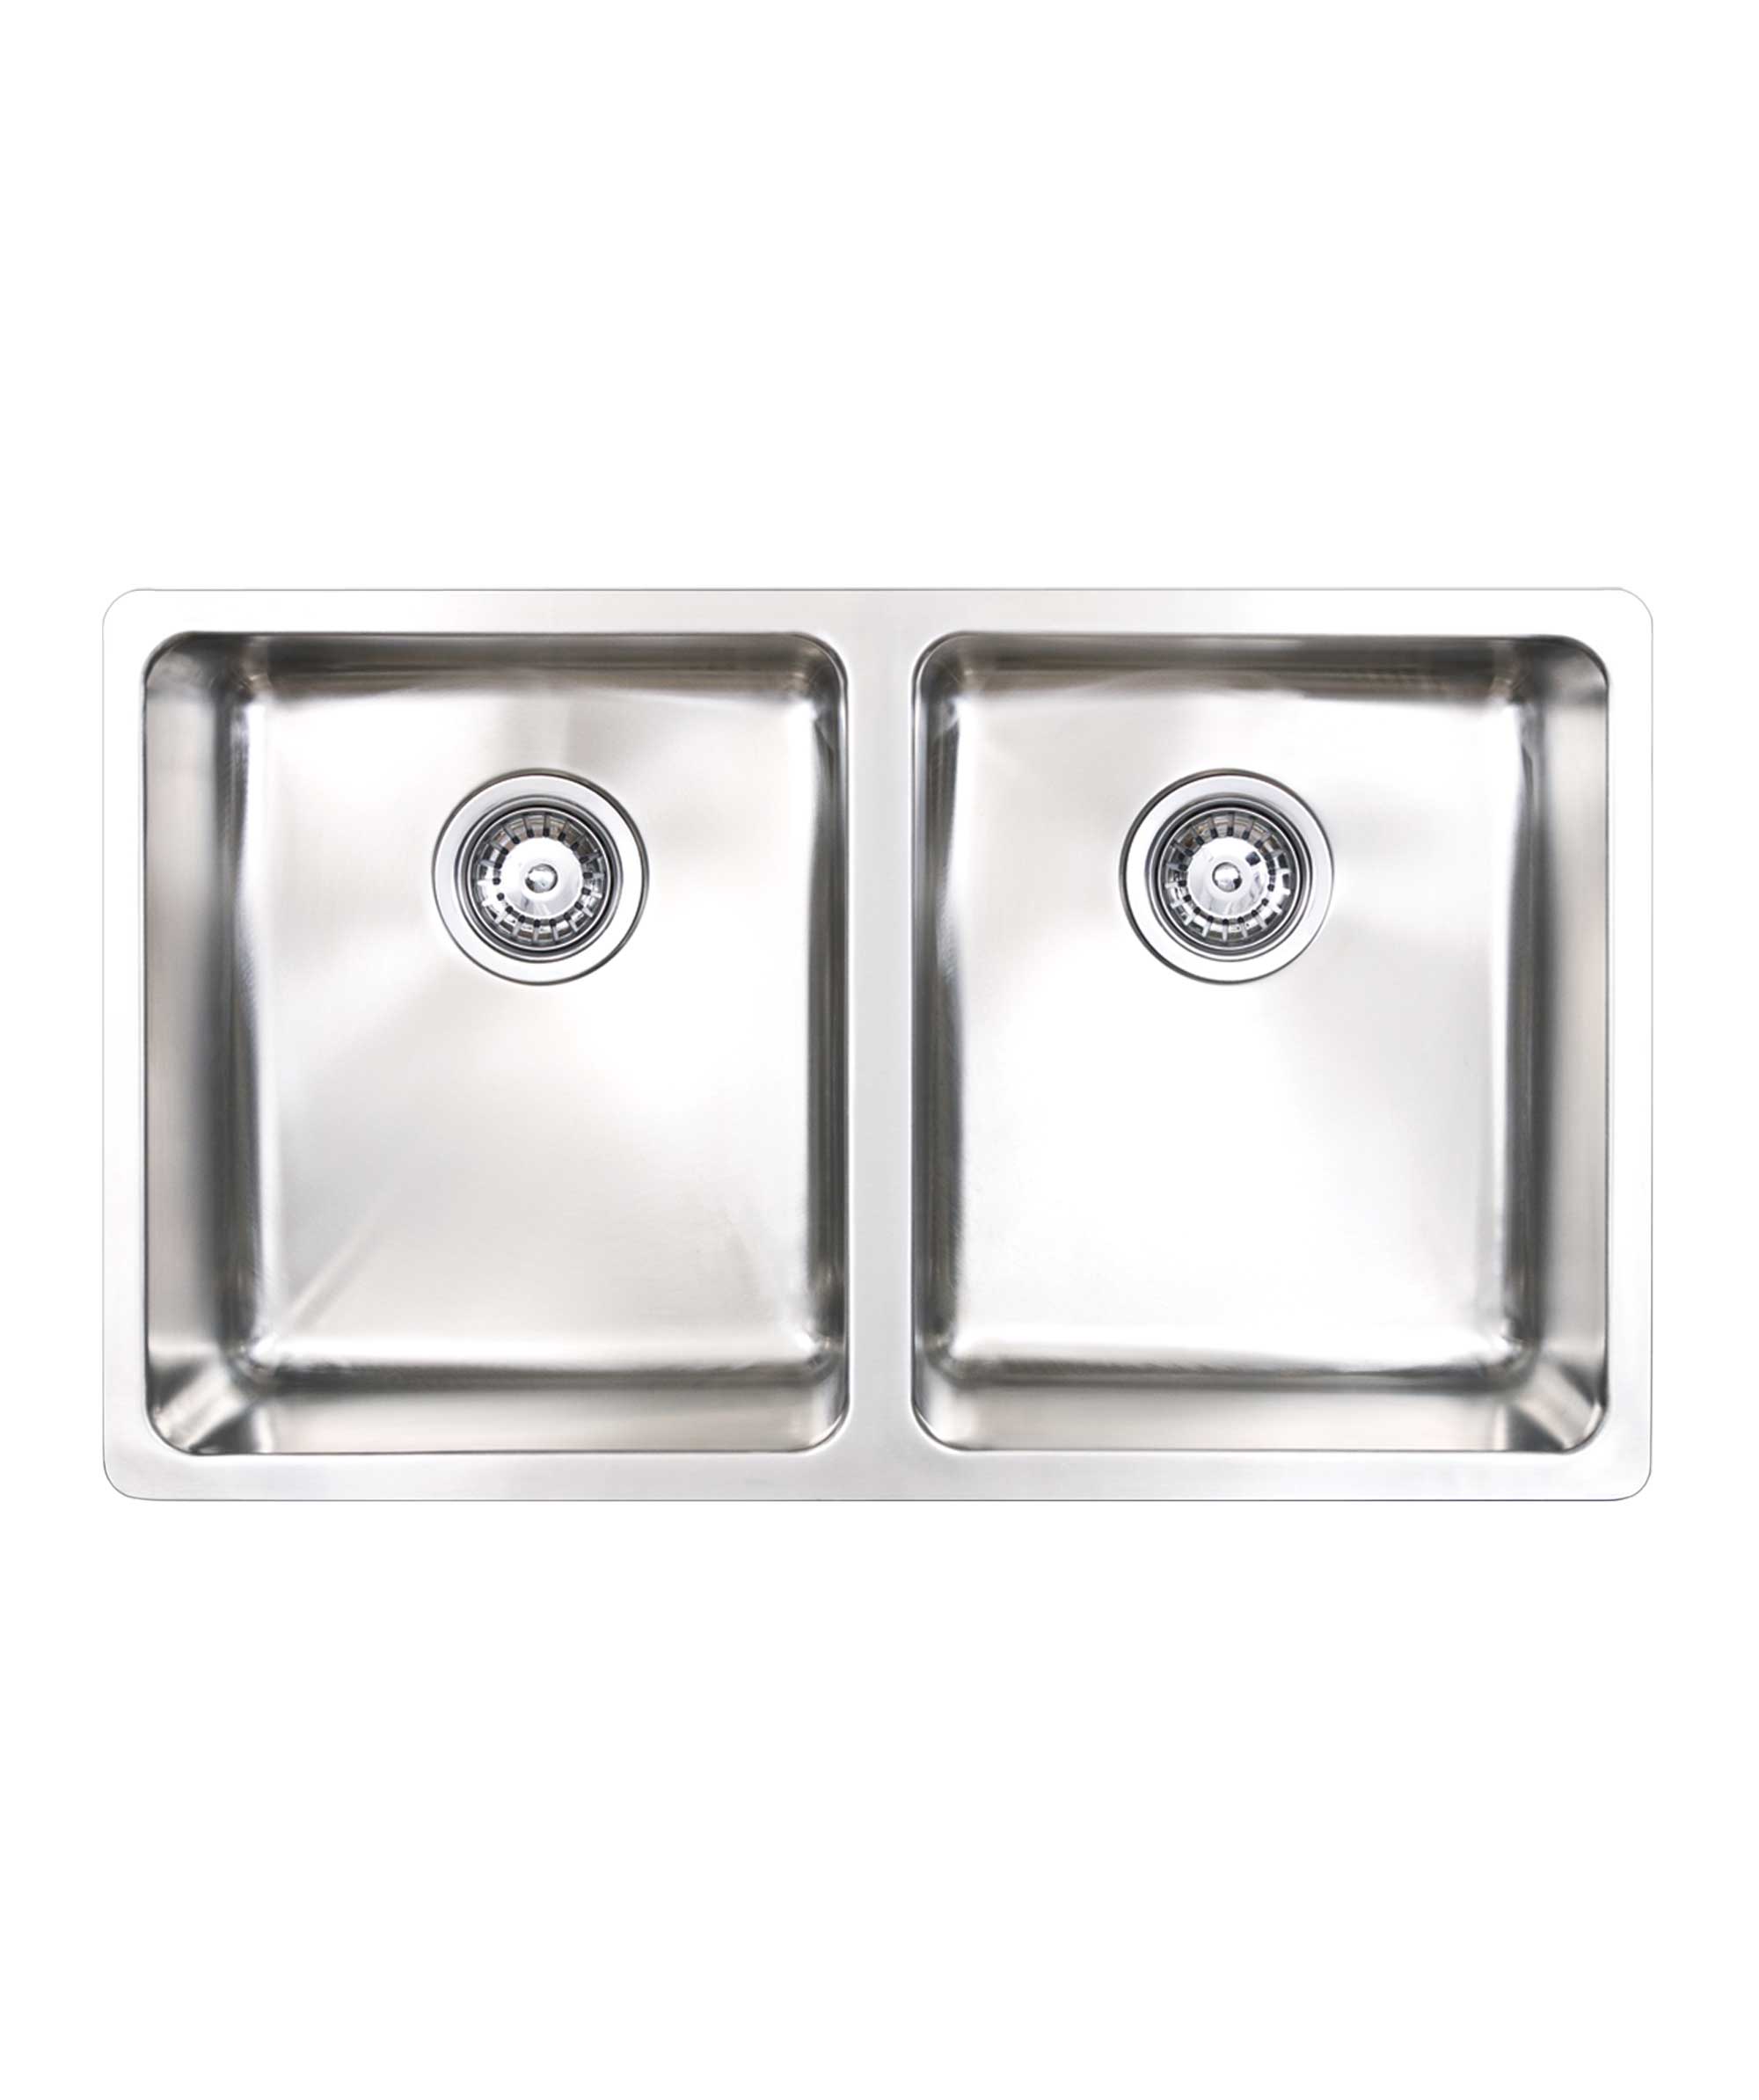 Kubic 768 stainless steel sink